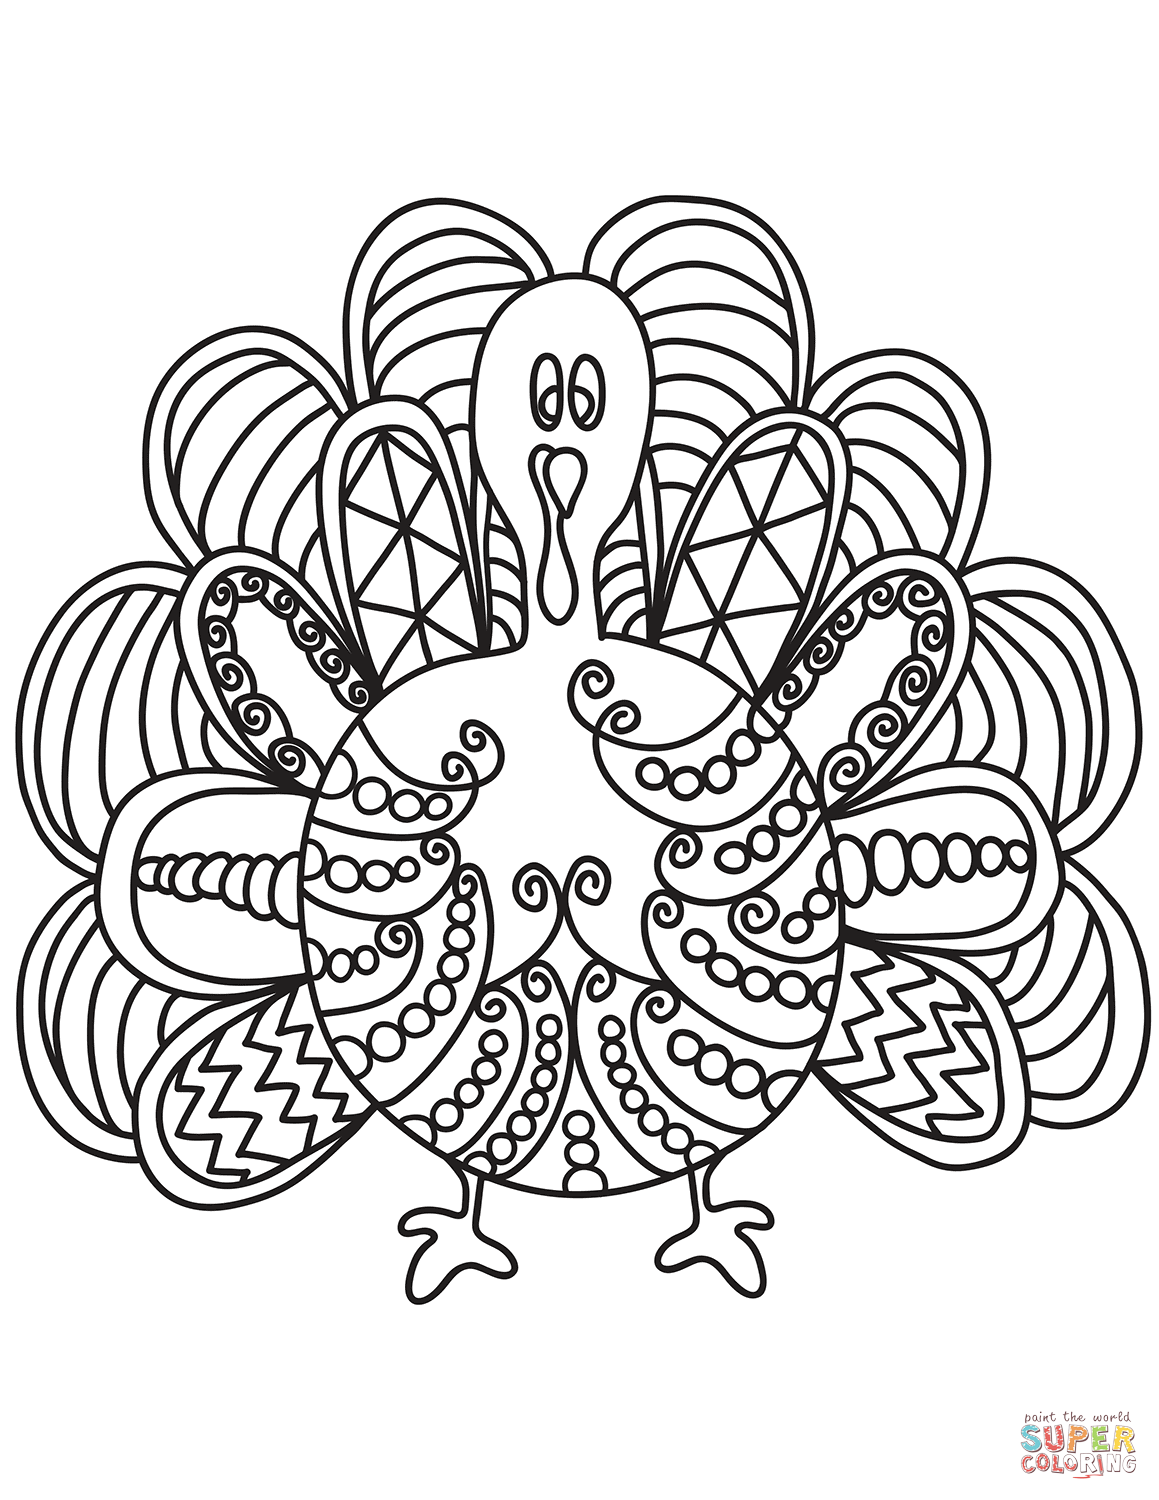 Pop art turkey coloring page free printable coloring pages